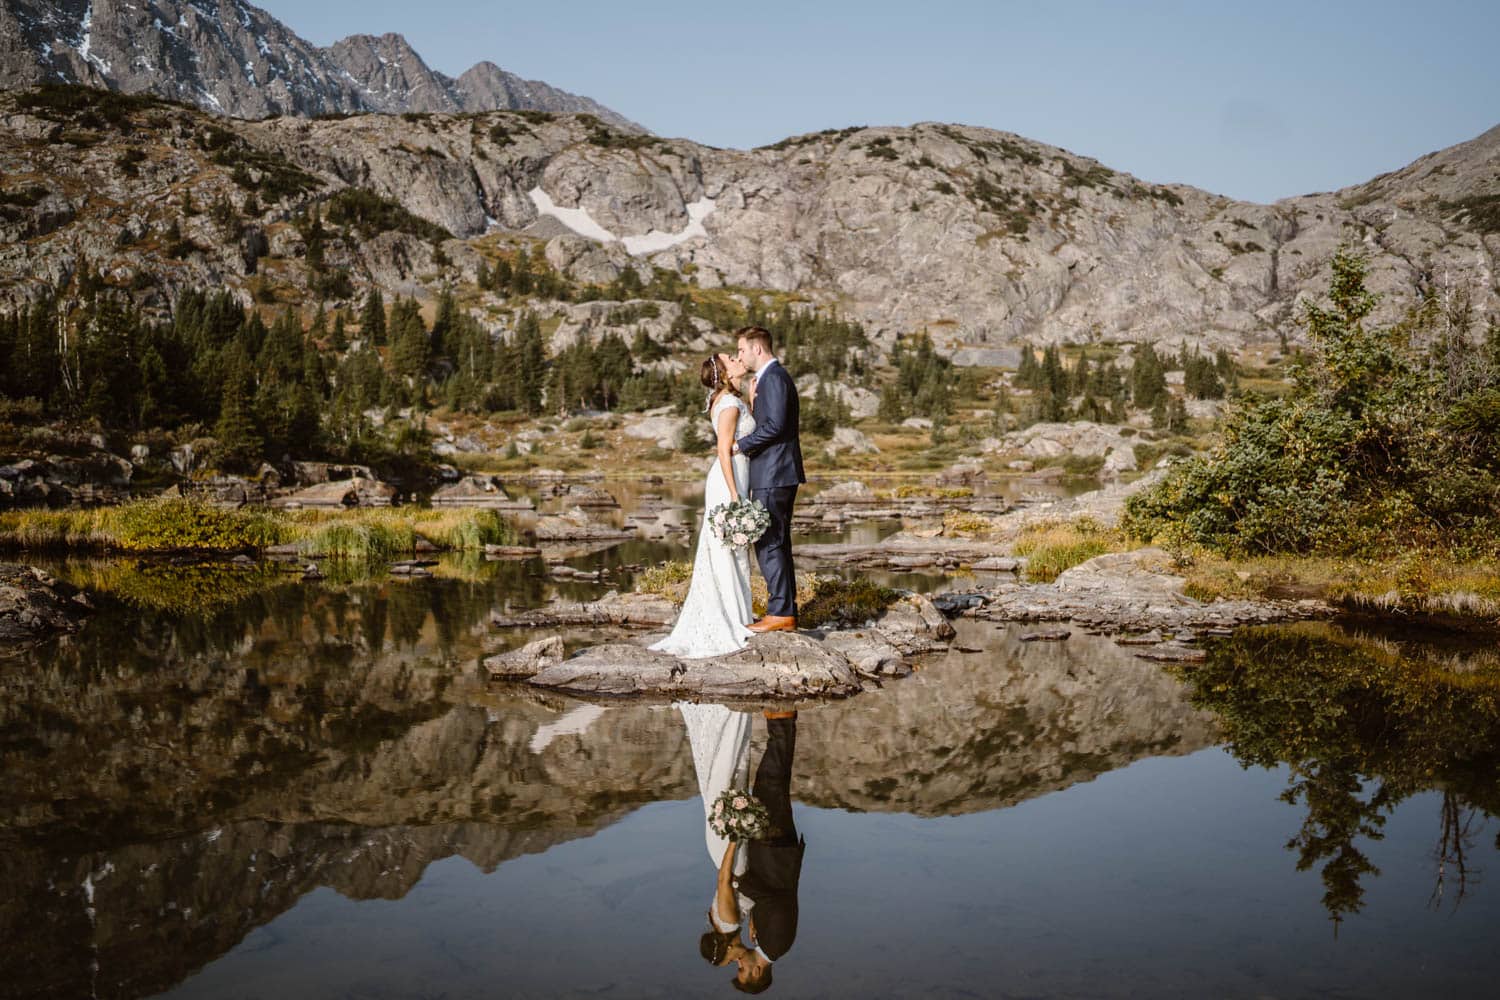 A couple in the reflection on an alpine lake in Colorado.